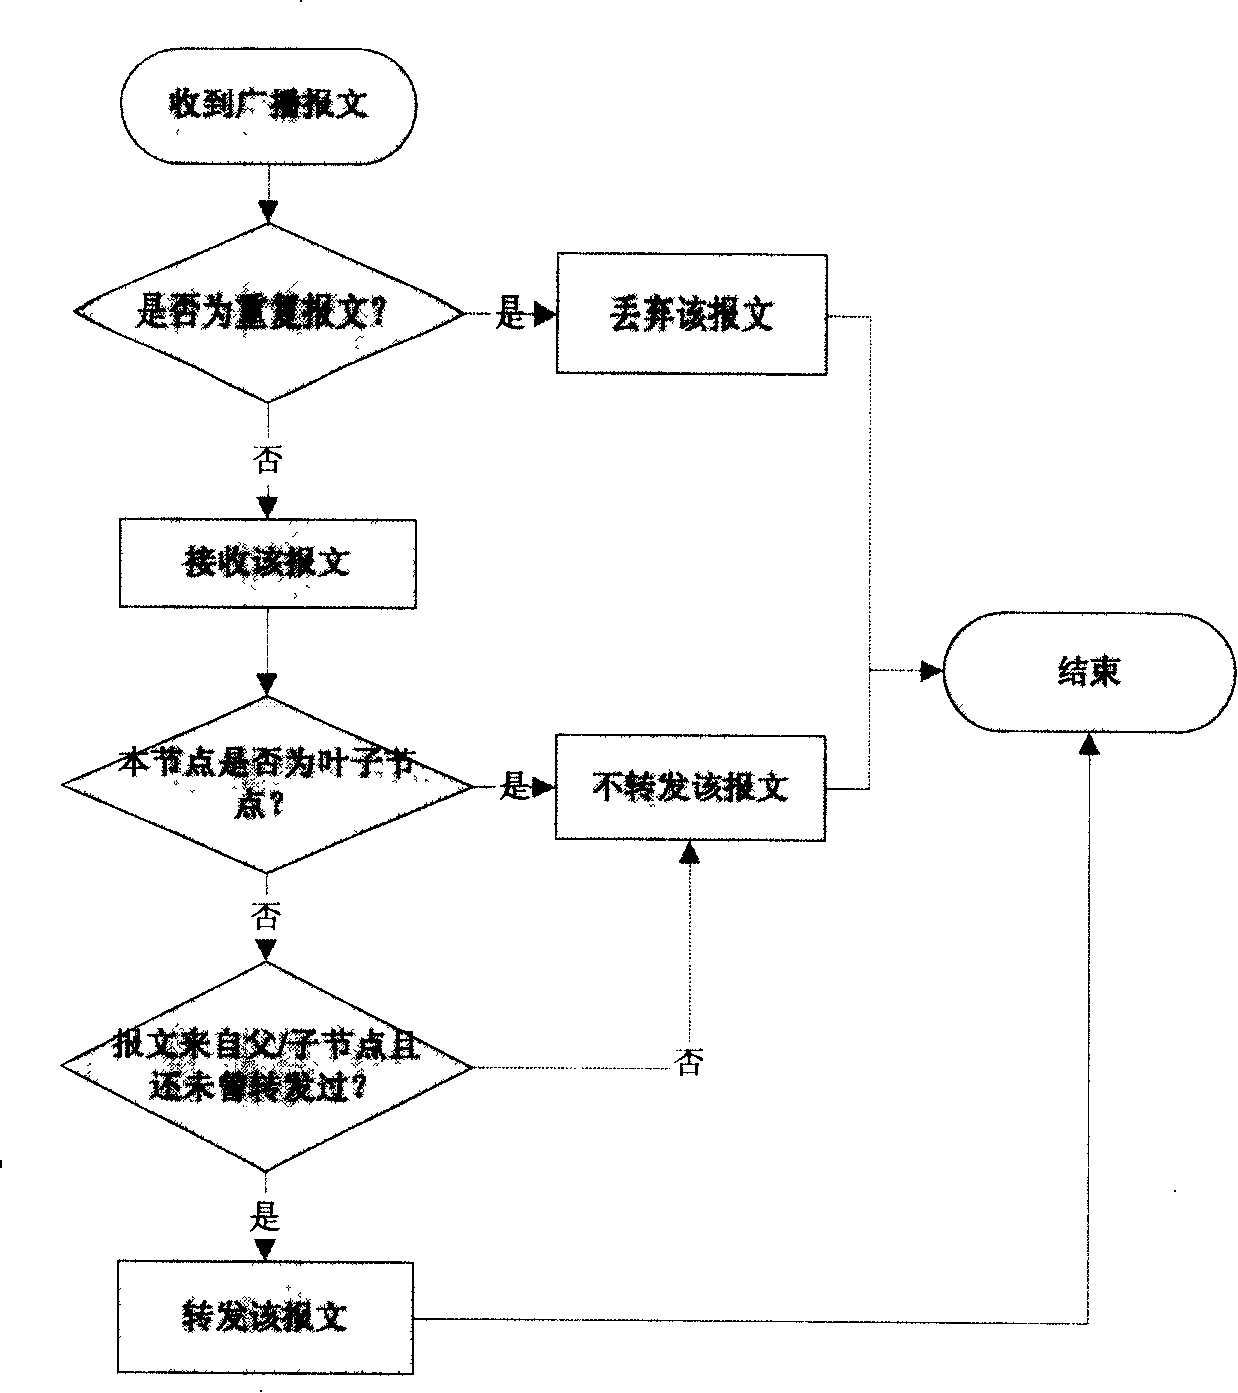 Wireless meshed network broadcast communication method facing to industry monitoring application